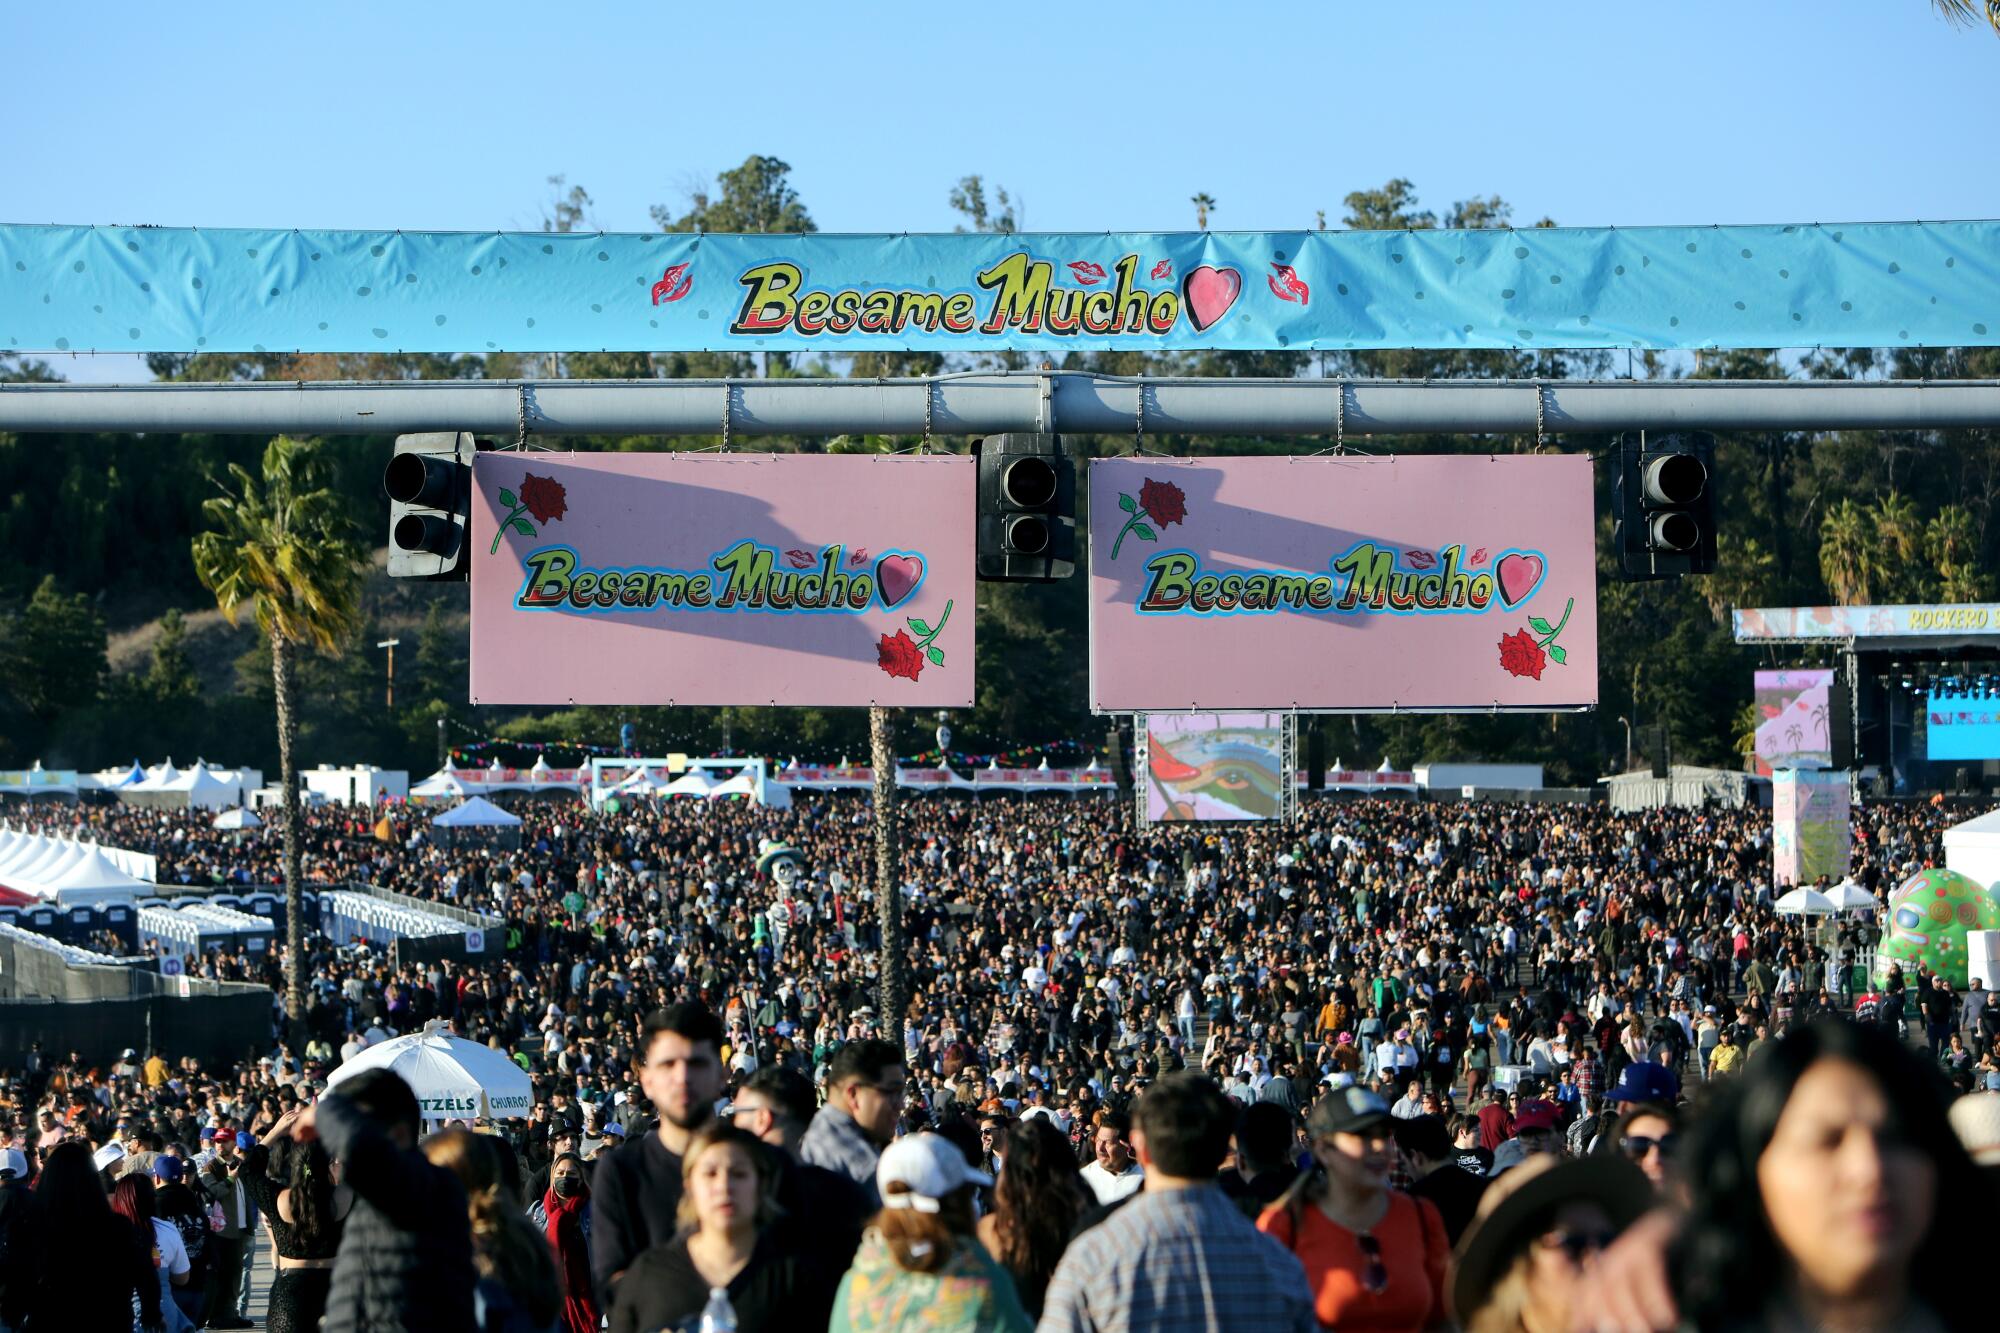 Thousands attended the sold-out Besame Mucho Festival, at Dodger Stadium